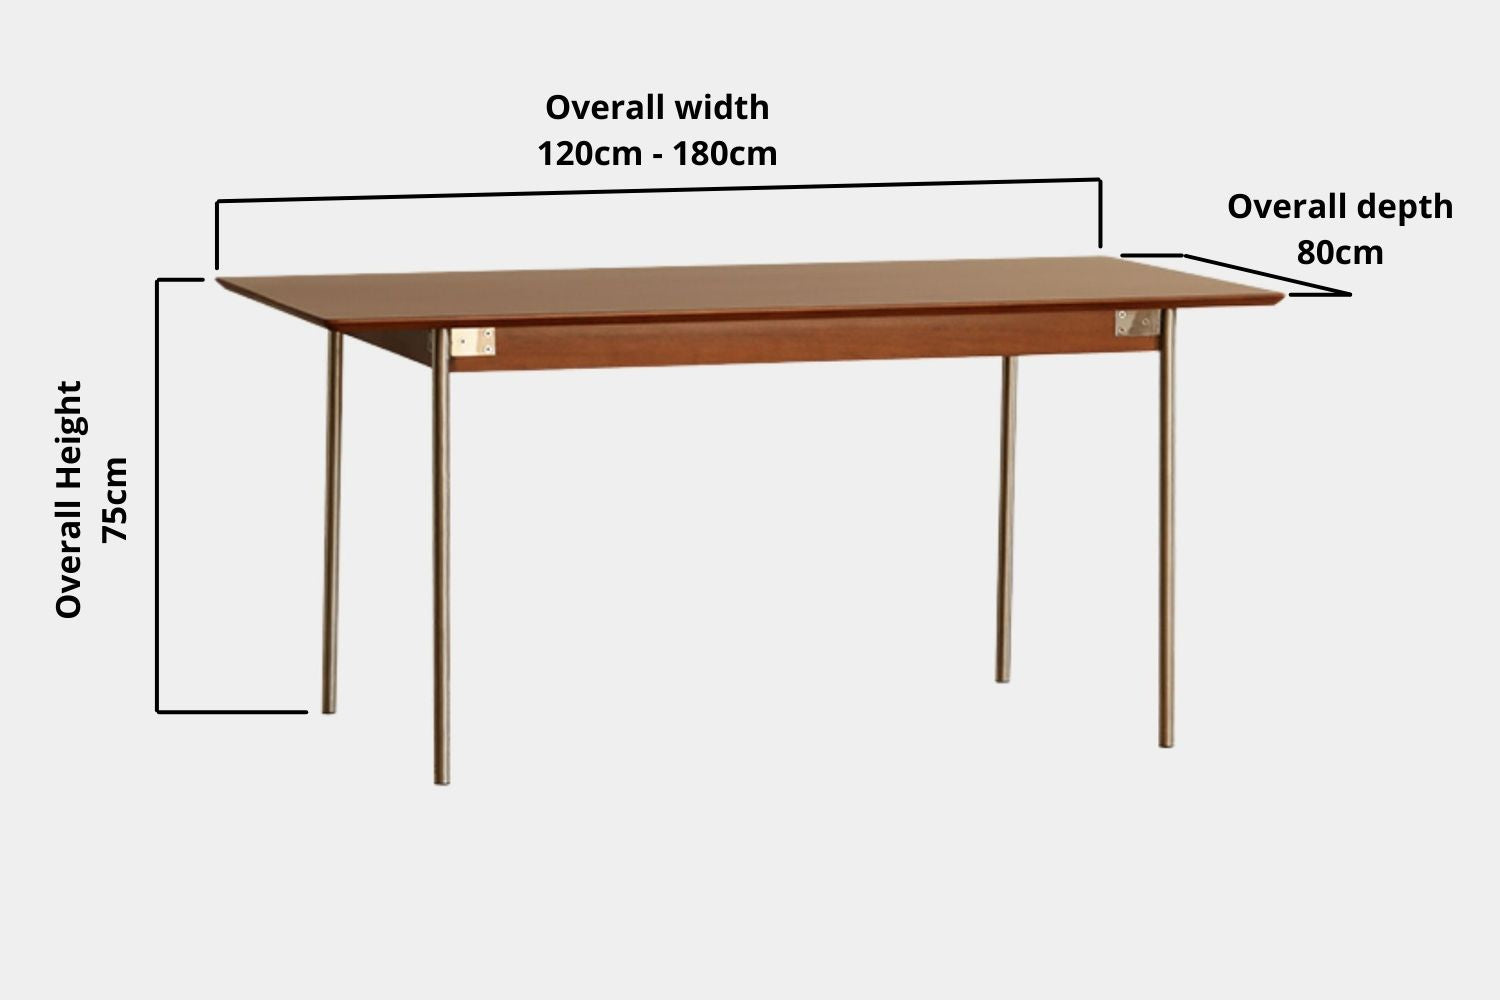 Key product dimensions such as depth, width and height for Taylor Poplar Wood Dining Table